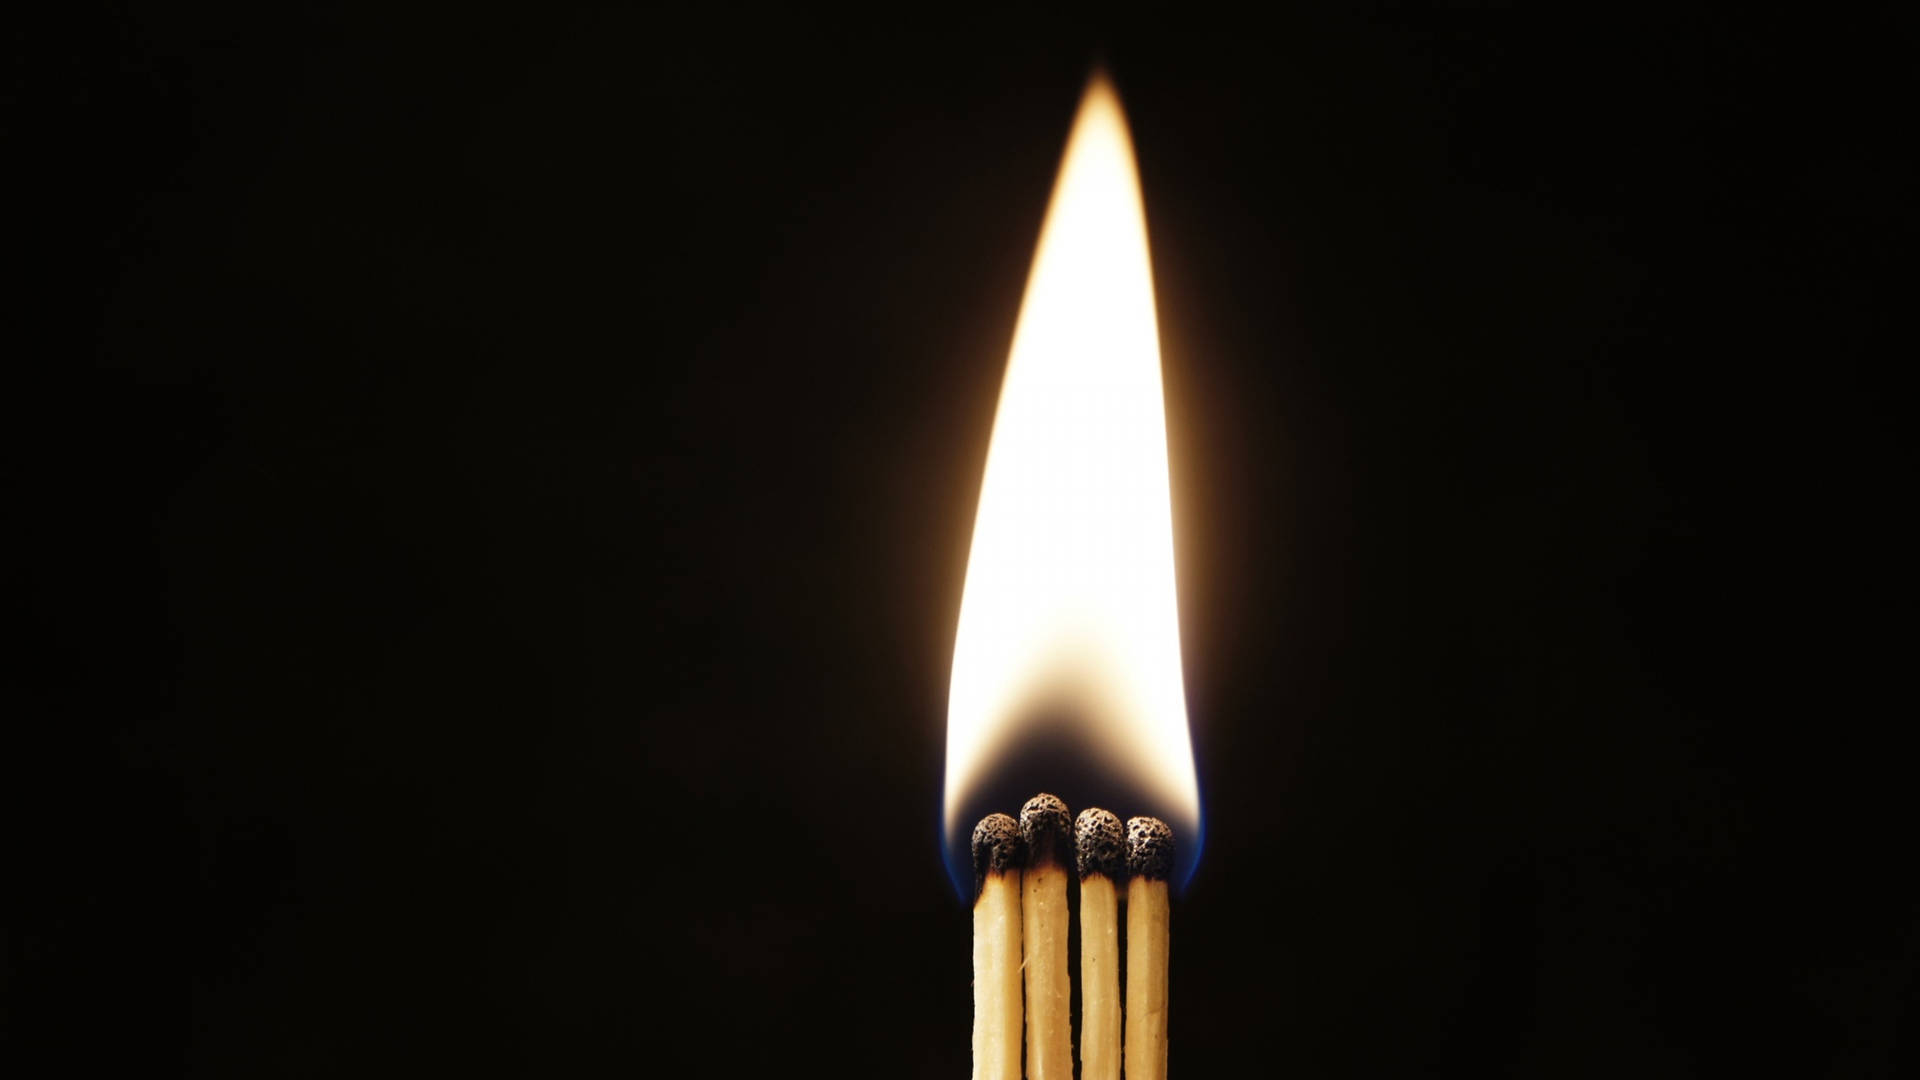 Matches Being Lit Together Wallpaper